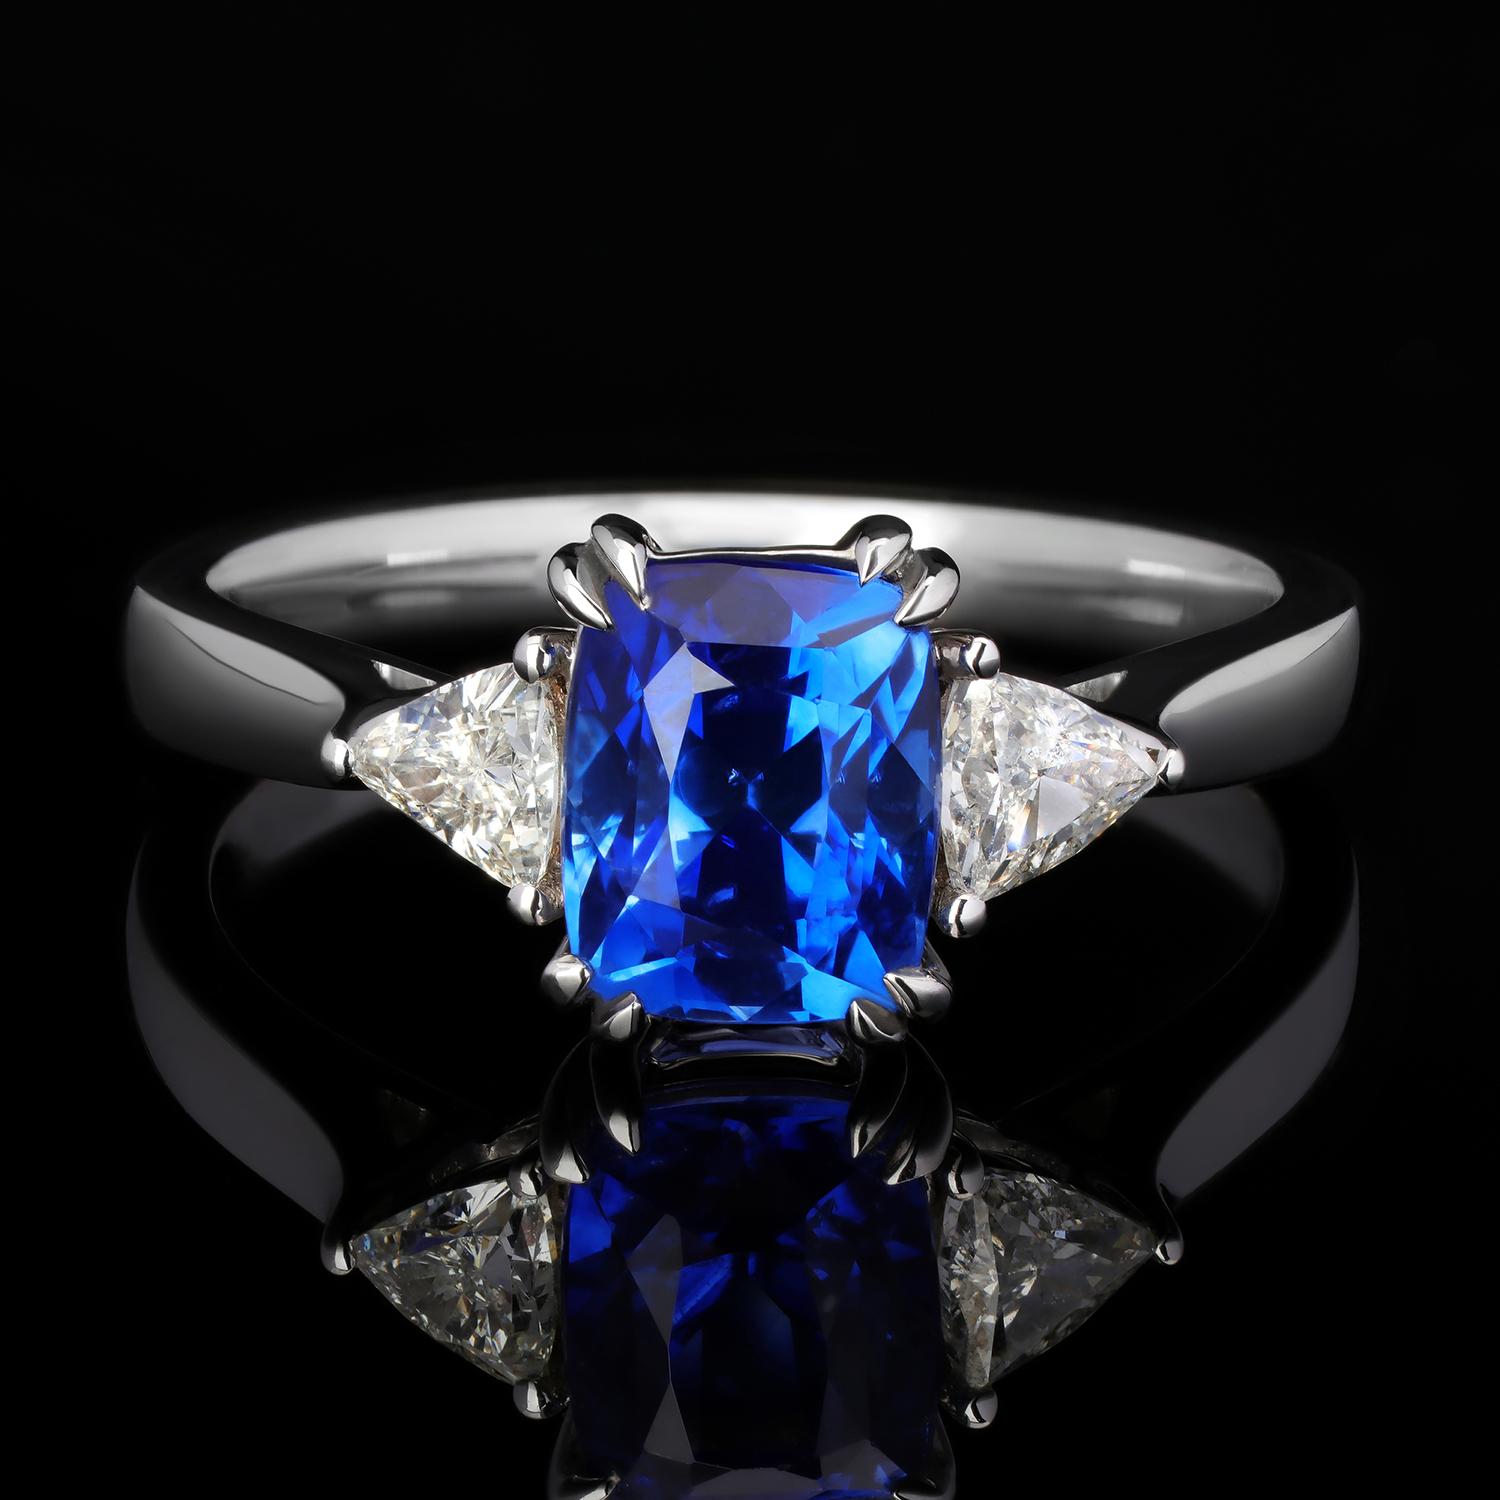 This contemporary custom made engagement ring/promise ring features a unique interplay of naturally beautiful gemstones. An Sapphire is securely prong set sideways in the center, exhibiting an incredible play-of-color. This hand-cutted Sapphire is